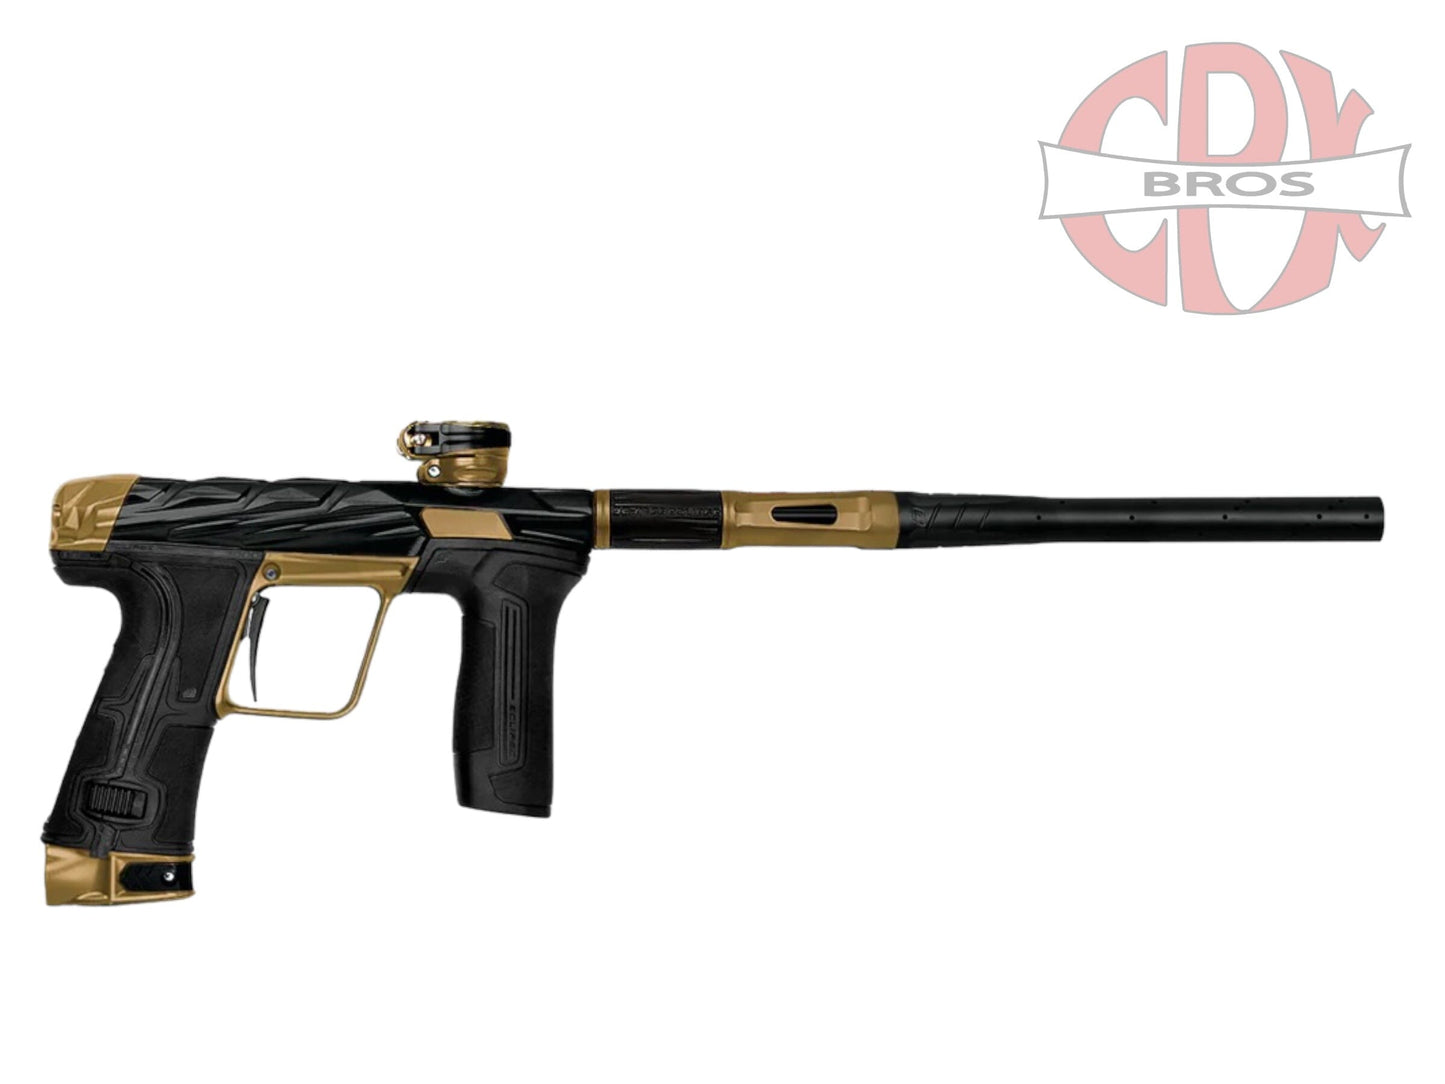 Used NEW PLANET ECLIPSE CS3 - INFAMOUS EDITION BLACK/TAN Paintball Gun from CPXBrosPaintball Buy/Sell/Trade Paintball Markers, New Paintball Guns, Paintball Hoppers, Paintball Masks, and Hormesis Headbands